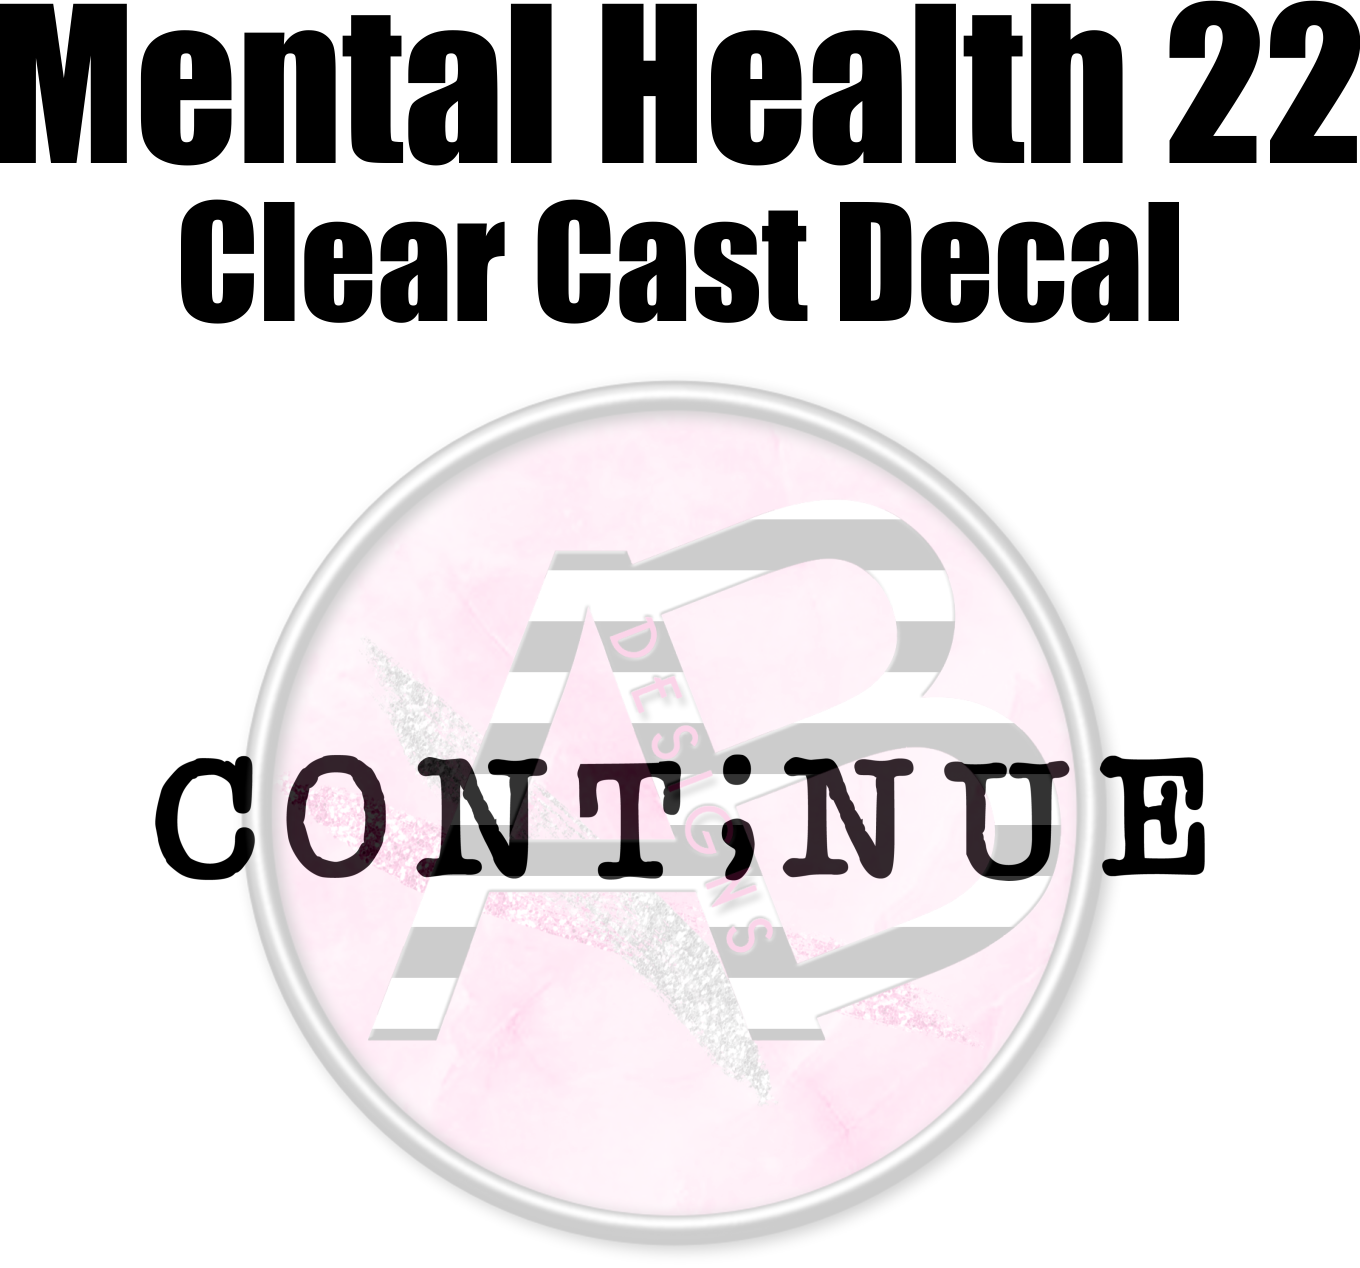 Mental Health 22 - Clear Cast Decal - 315